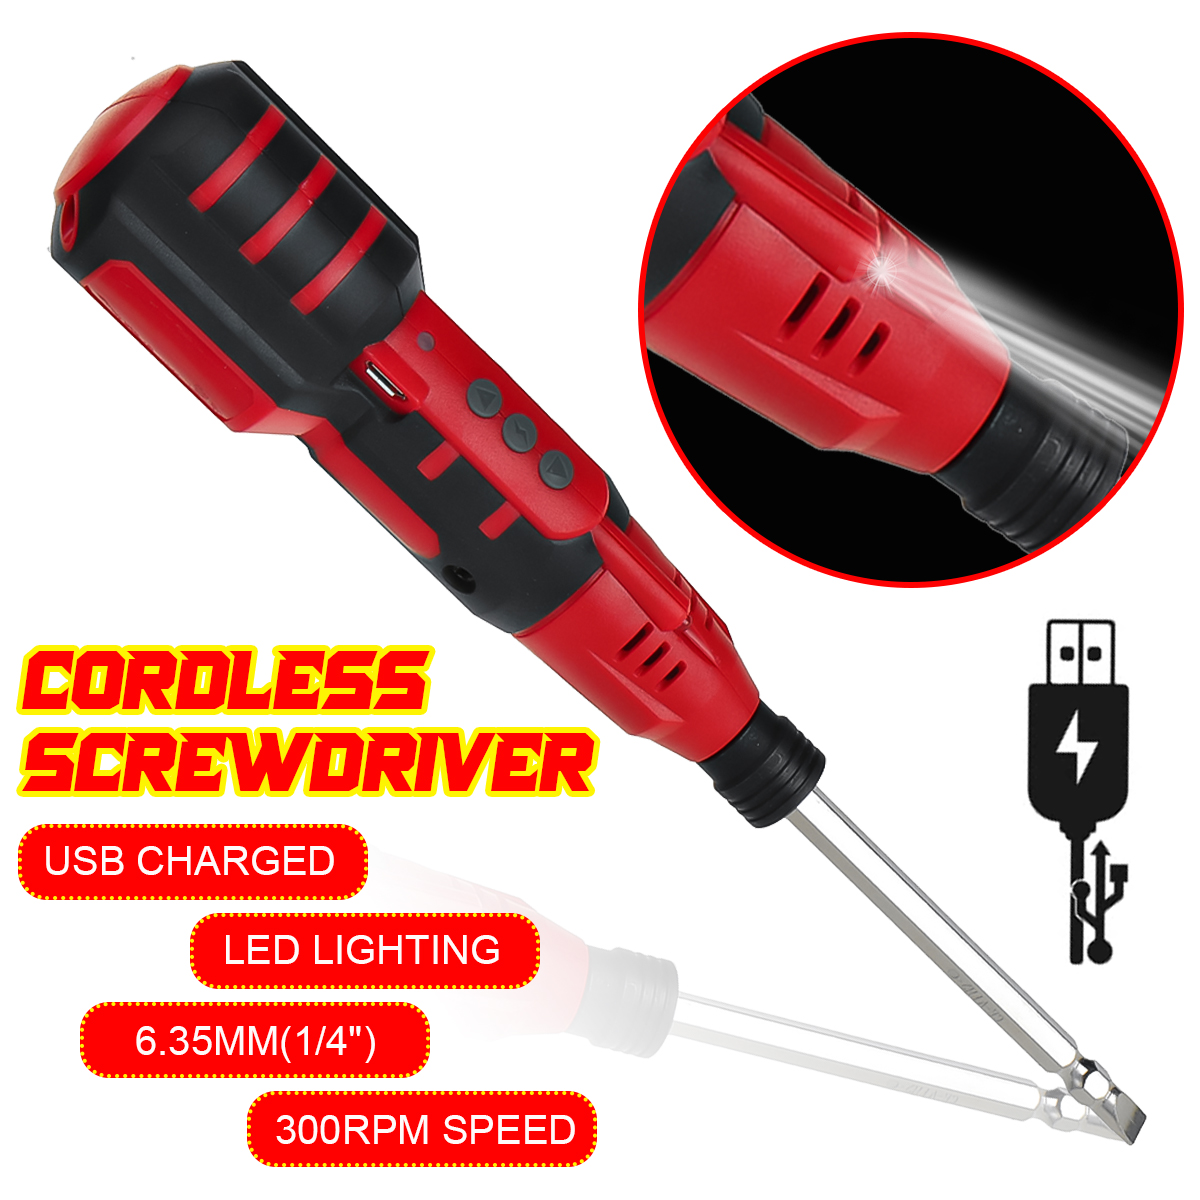 Cordless-Electric-Screwdriver-Set-Electric-Drill-USB-Rechargeable-Handle-With-LED-Light-1913246-2